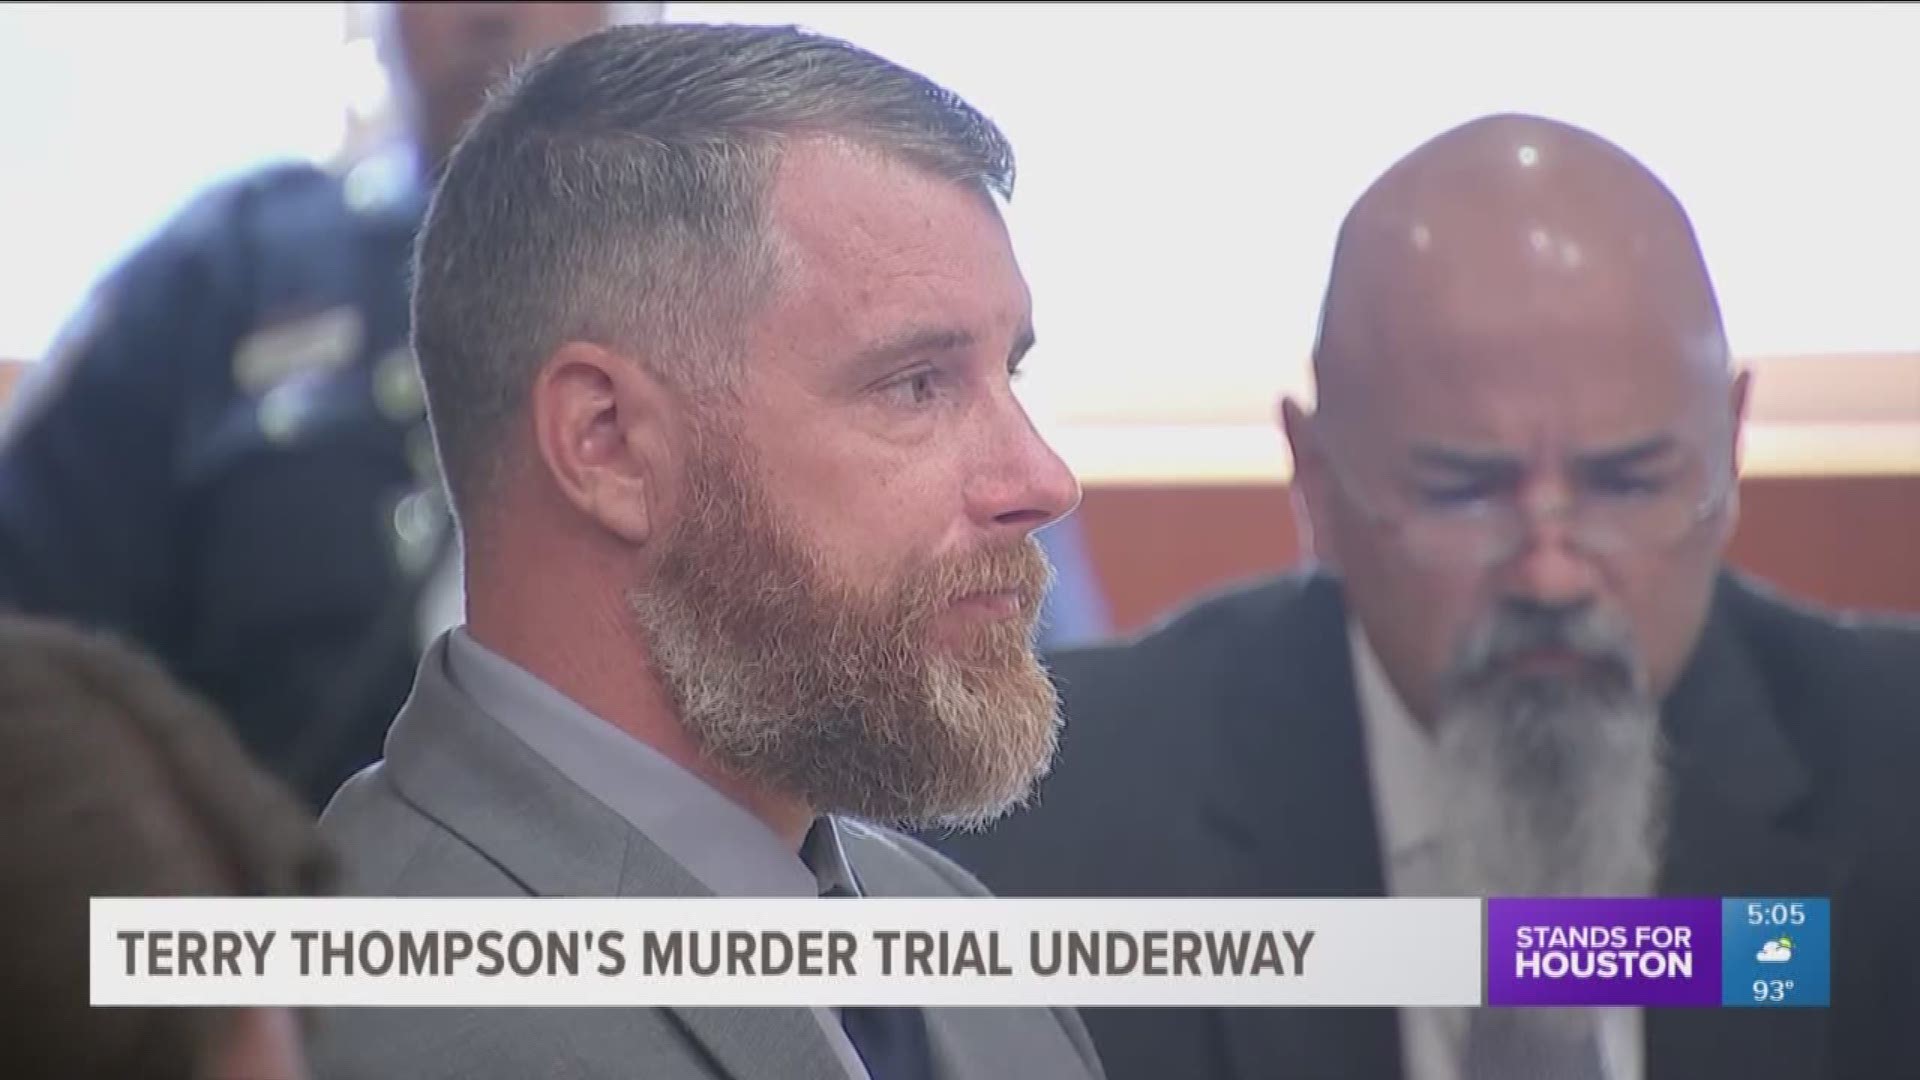 The trial of Terry Brian Thompson started Wednesday in a downtown courtroom filled to capacity and attorneys told dramatically different accounts of the events that occurred on the night of May 28, 2017 outside of a Denny?s restaurant in Crosby.